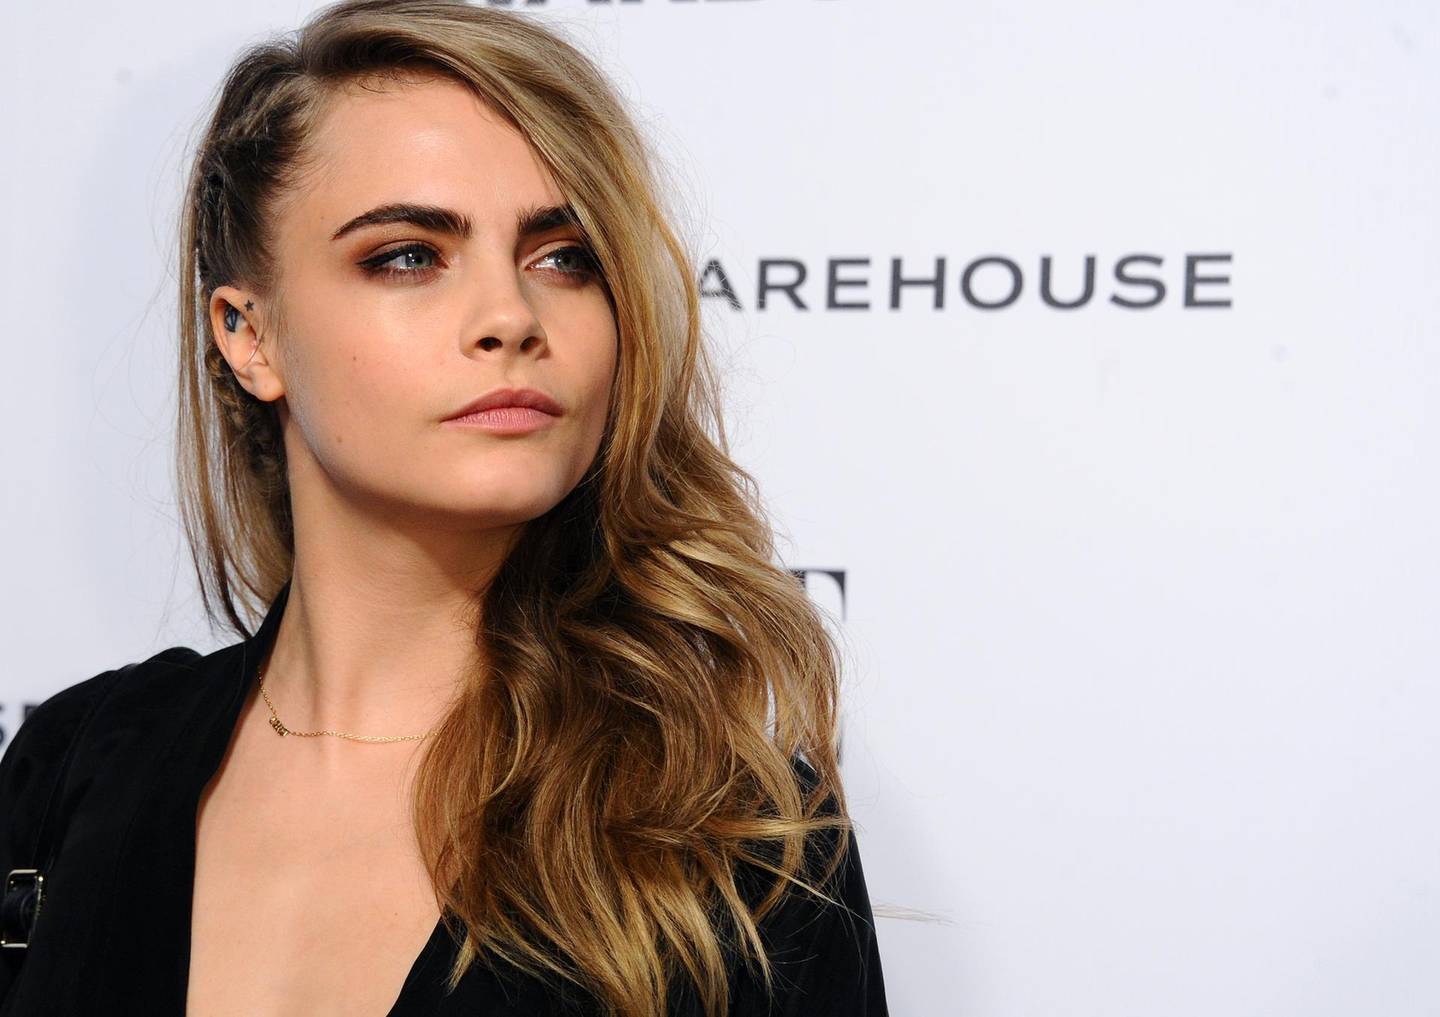 LONDON, ENGLAND - FEBRUARY 18:  Cara Delevingne attends the Elle Style Awards 2014 at one Embankment on February 18, 2014 in London, England.  (Photo by Anthony Harvey/Getty Images)